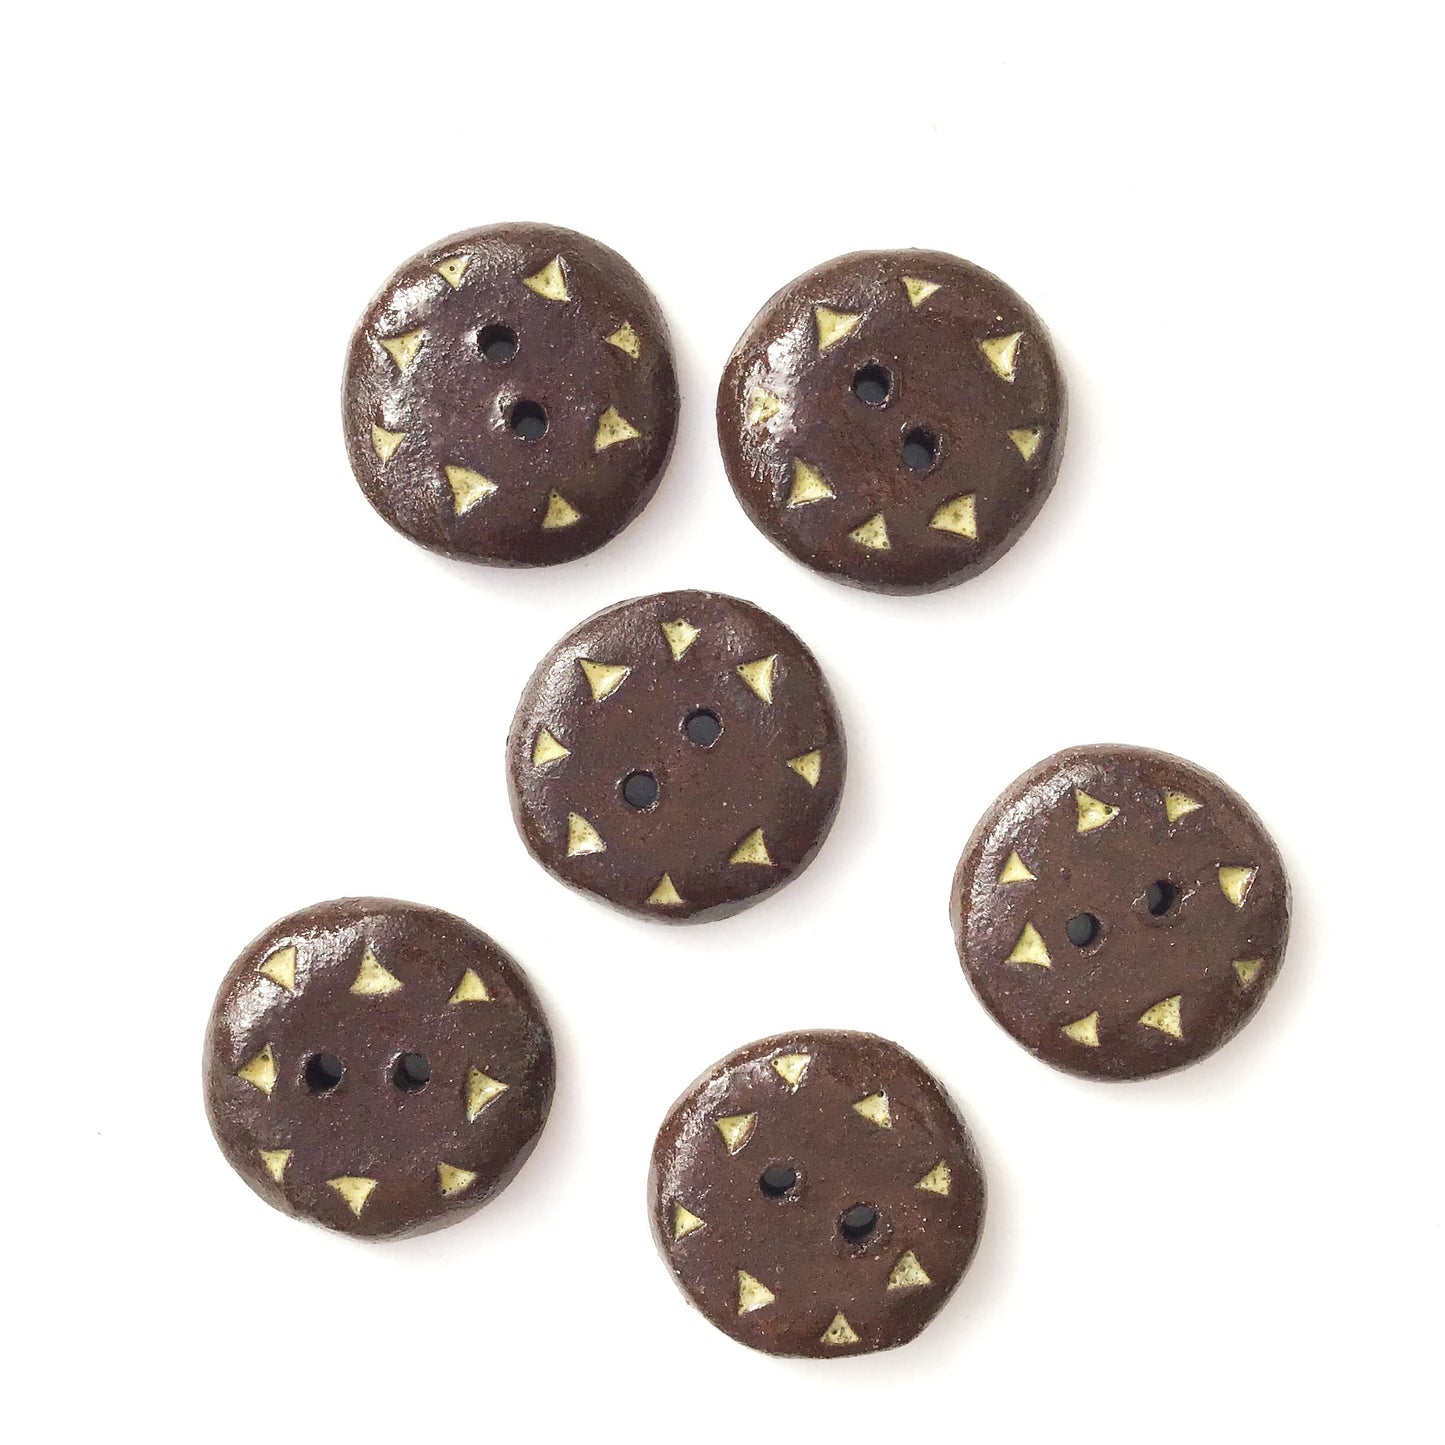 Black Clay Buttons with Yellow Detail - "The Sun" -13/16" - 6 Pack